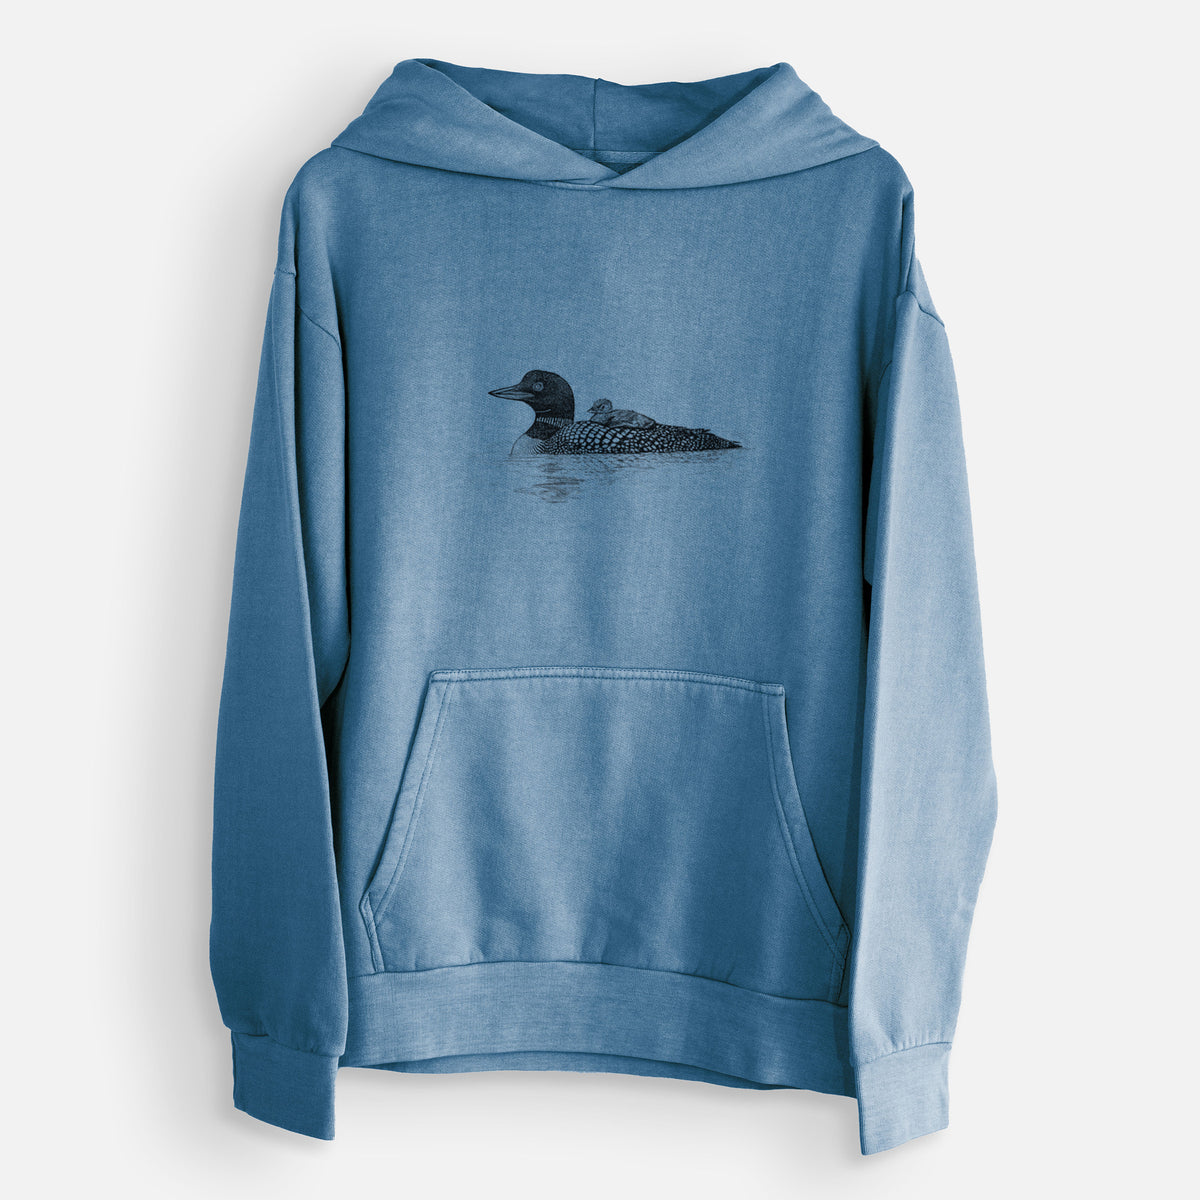 Common Loon with Chick - Gavia immer  - Urban Heavyweight Hoodie